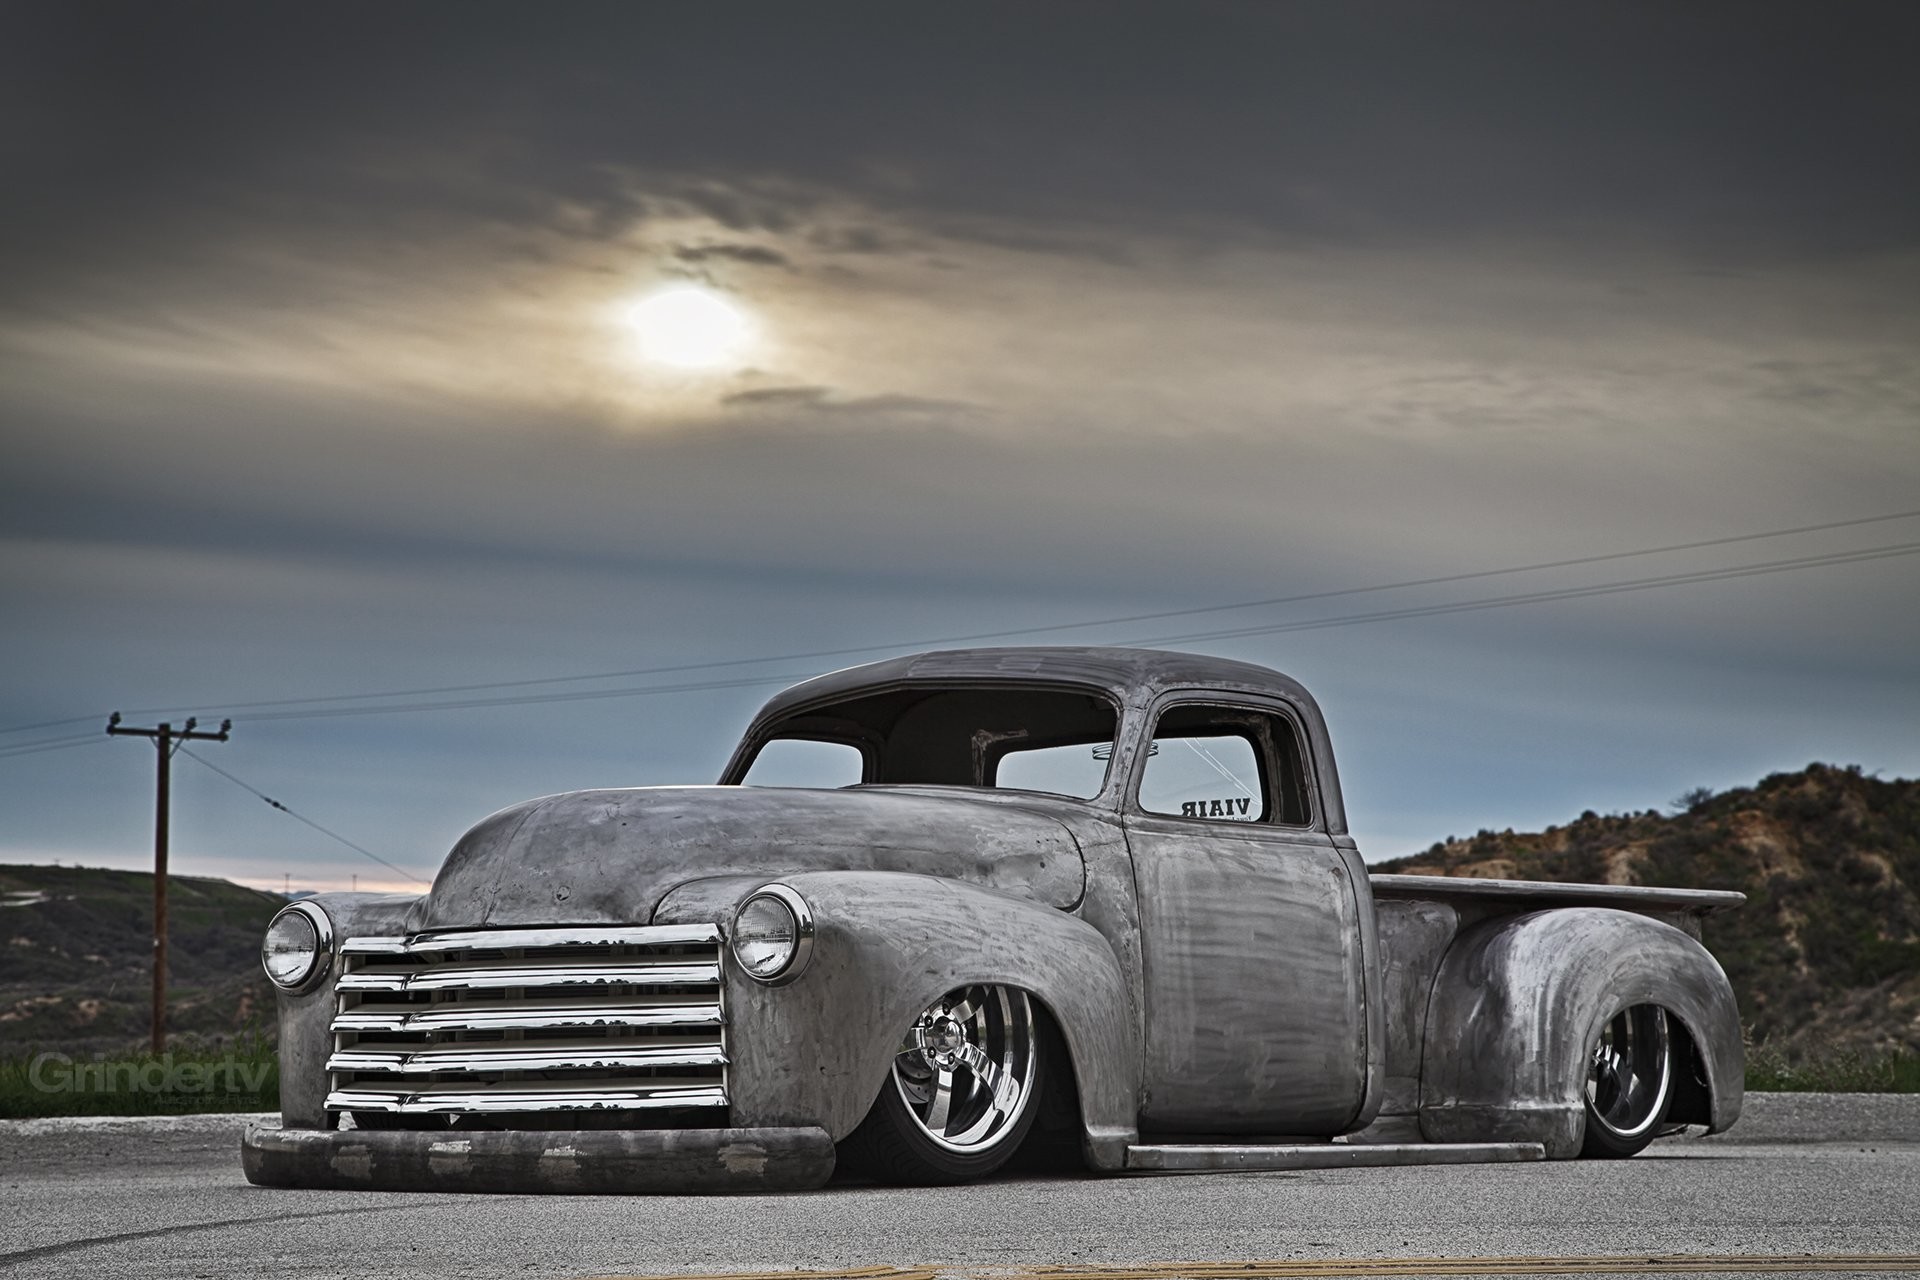 1920x1280 Chevrolet truck wallpaper free for iphone chevy camaro android jpg   Dropped trucks iphone wallpapers